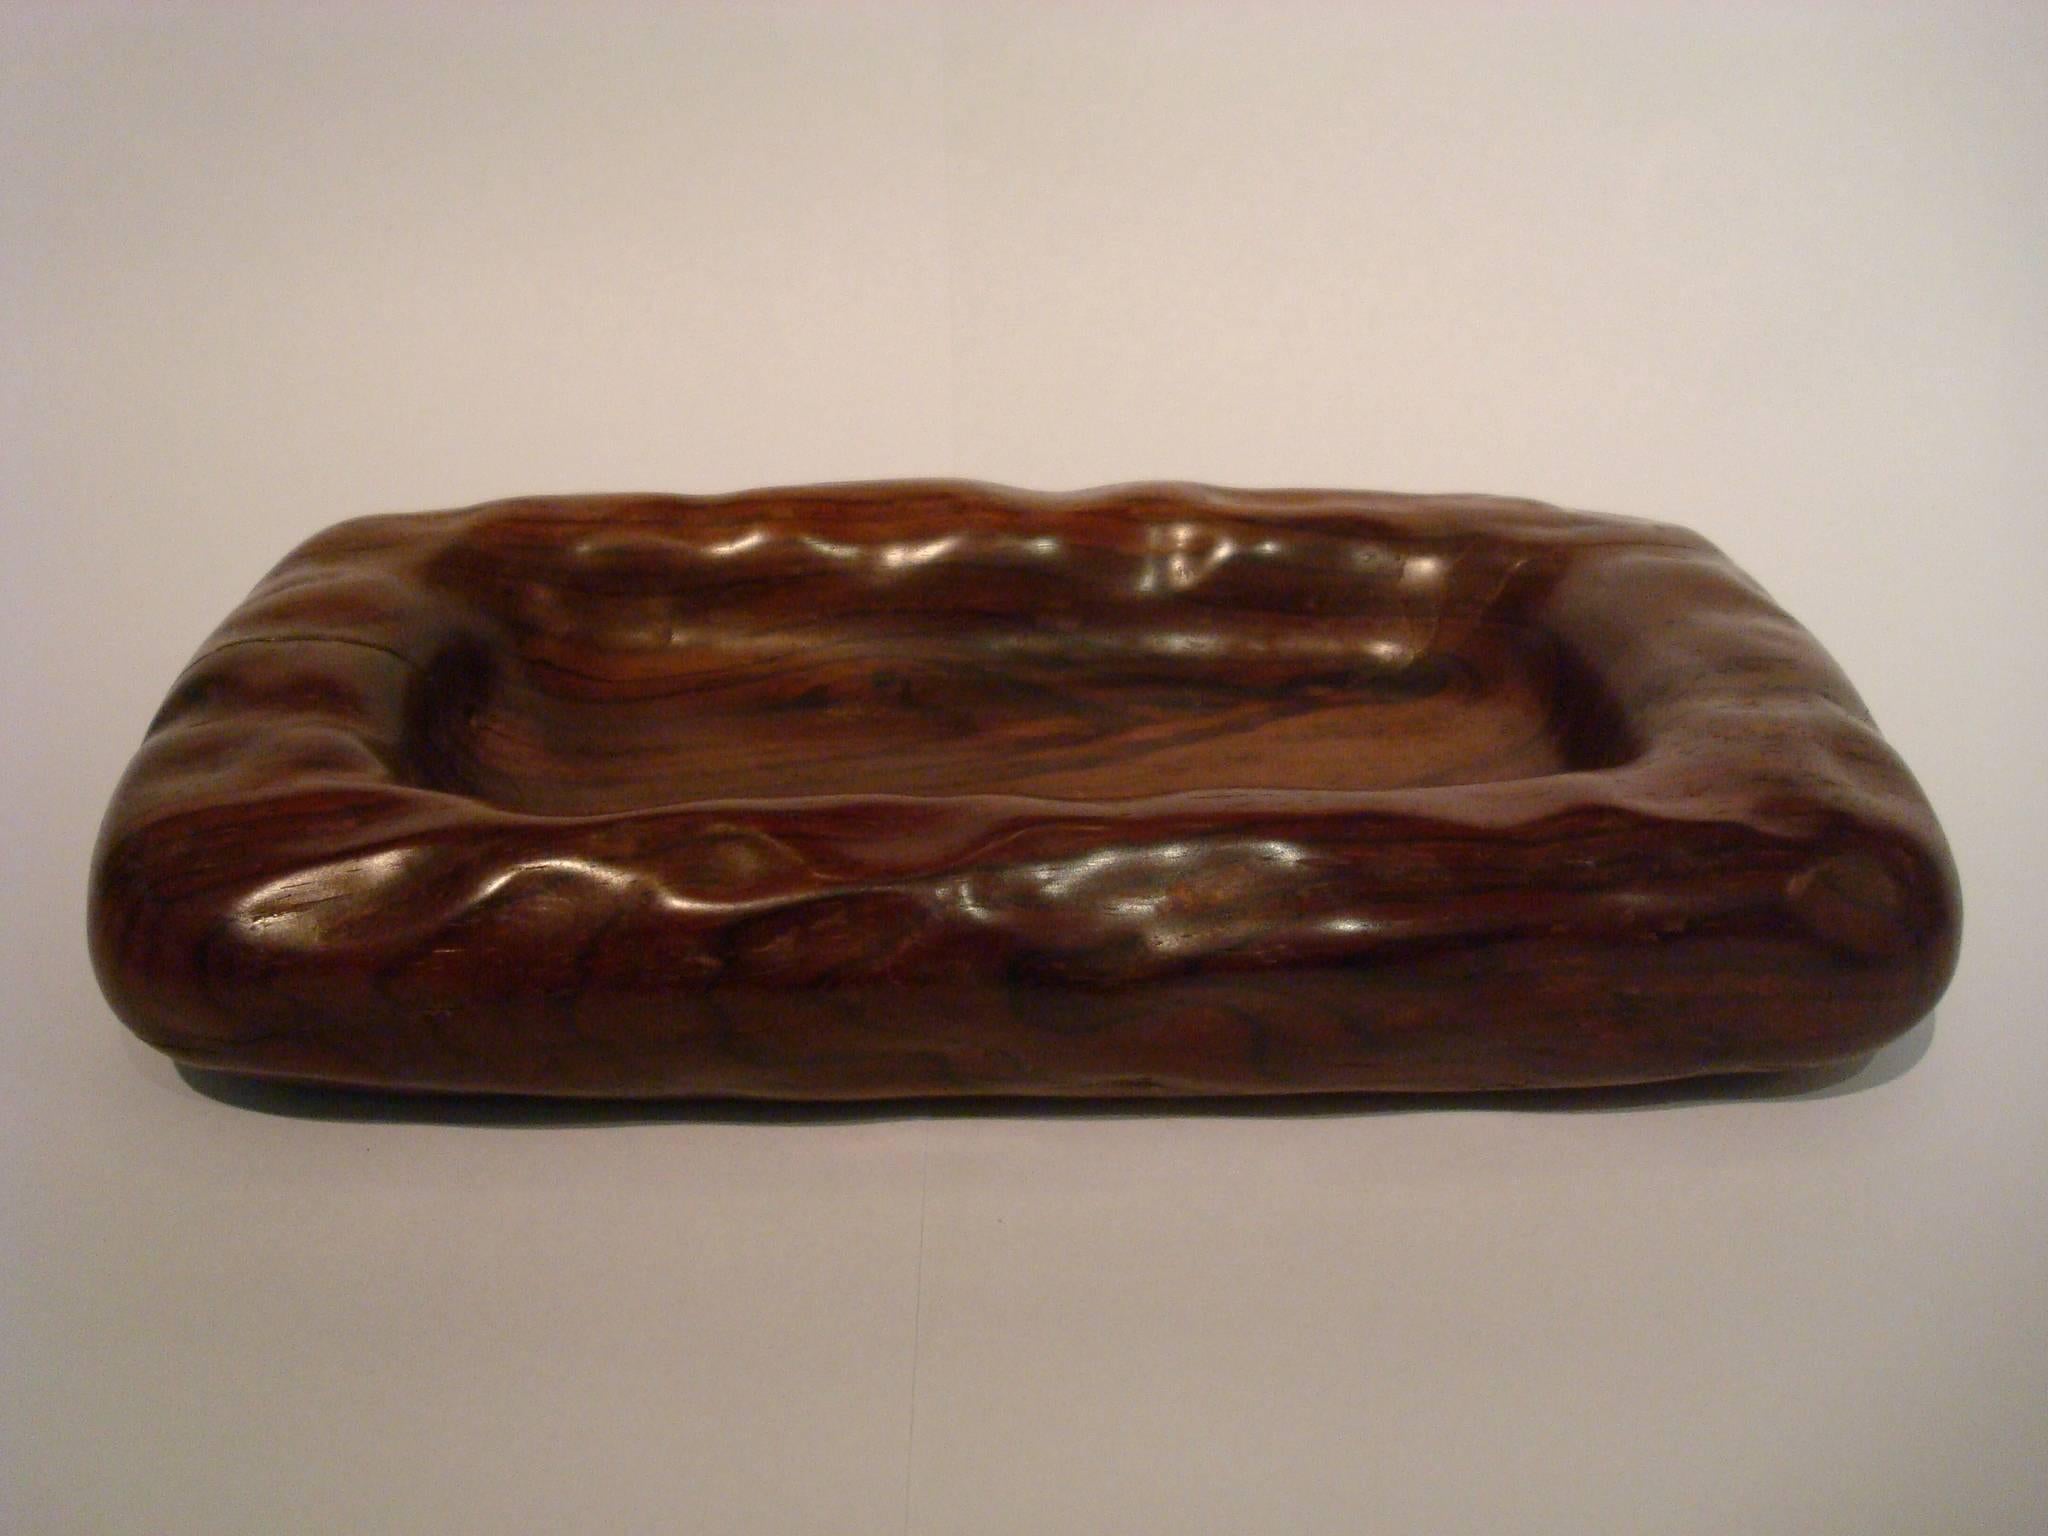 Lovely Alexandre Noll cigar ashtray or bowl. Carved in exotic wood. Signed, circa 1940.